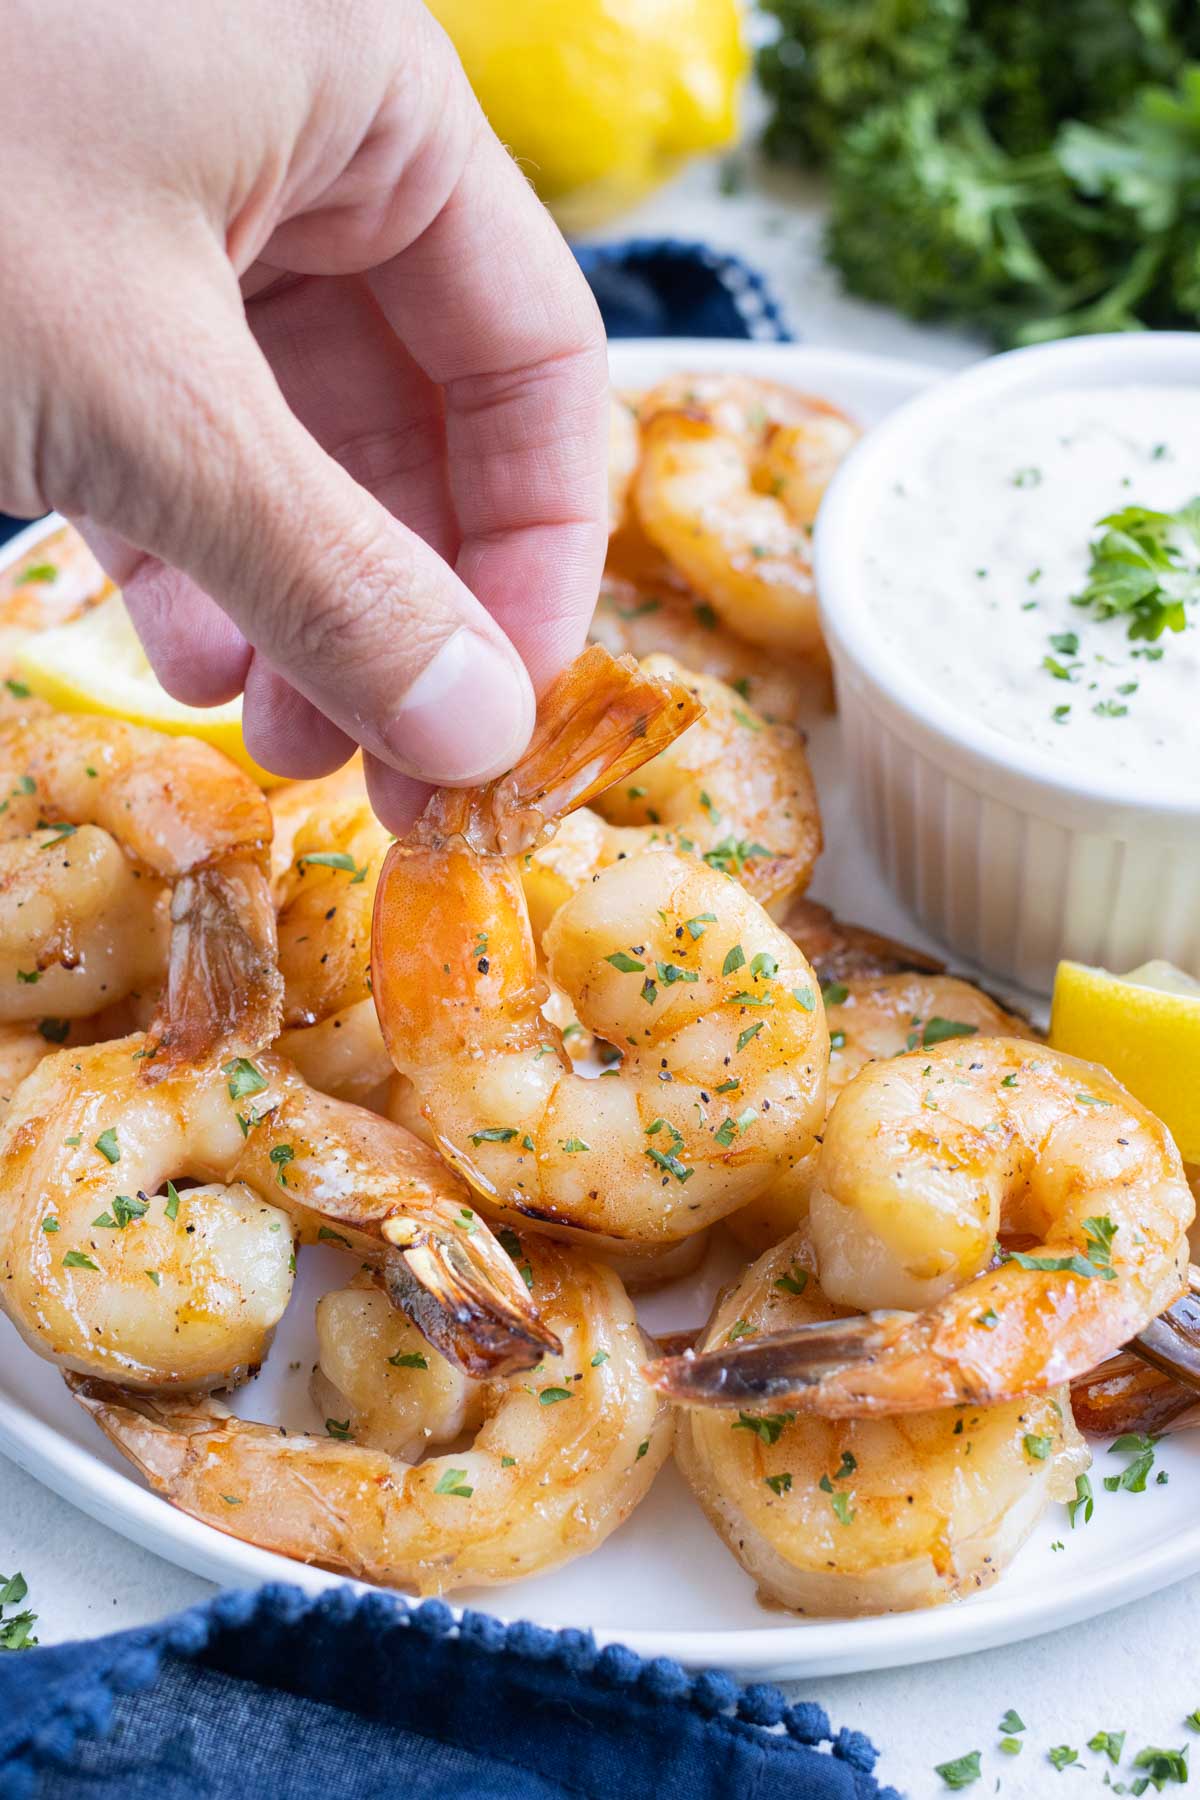 You can serve shrimp with a variety of dipping sauces.